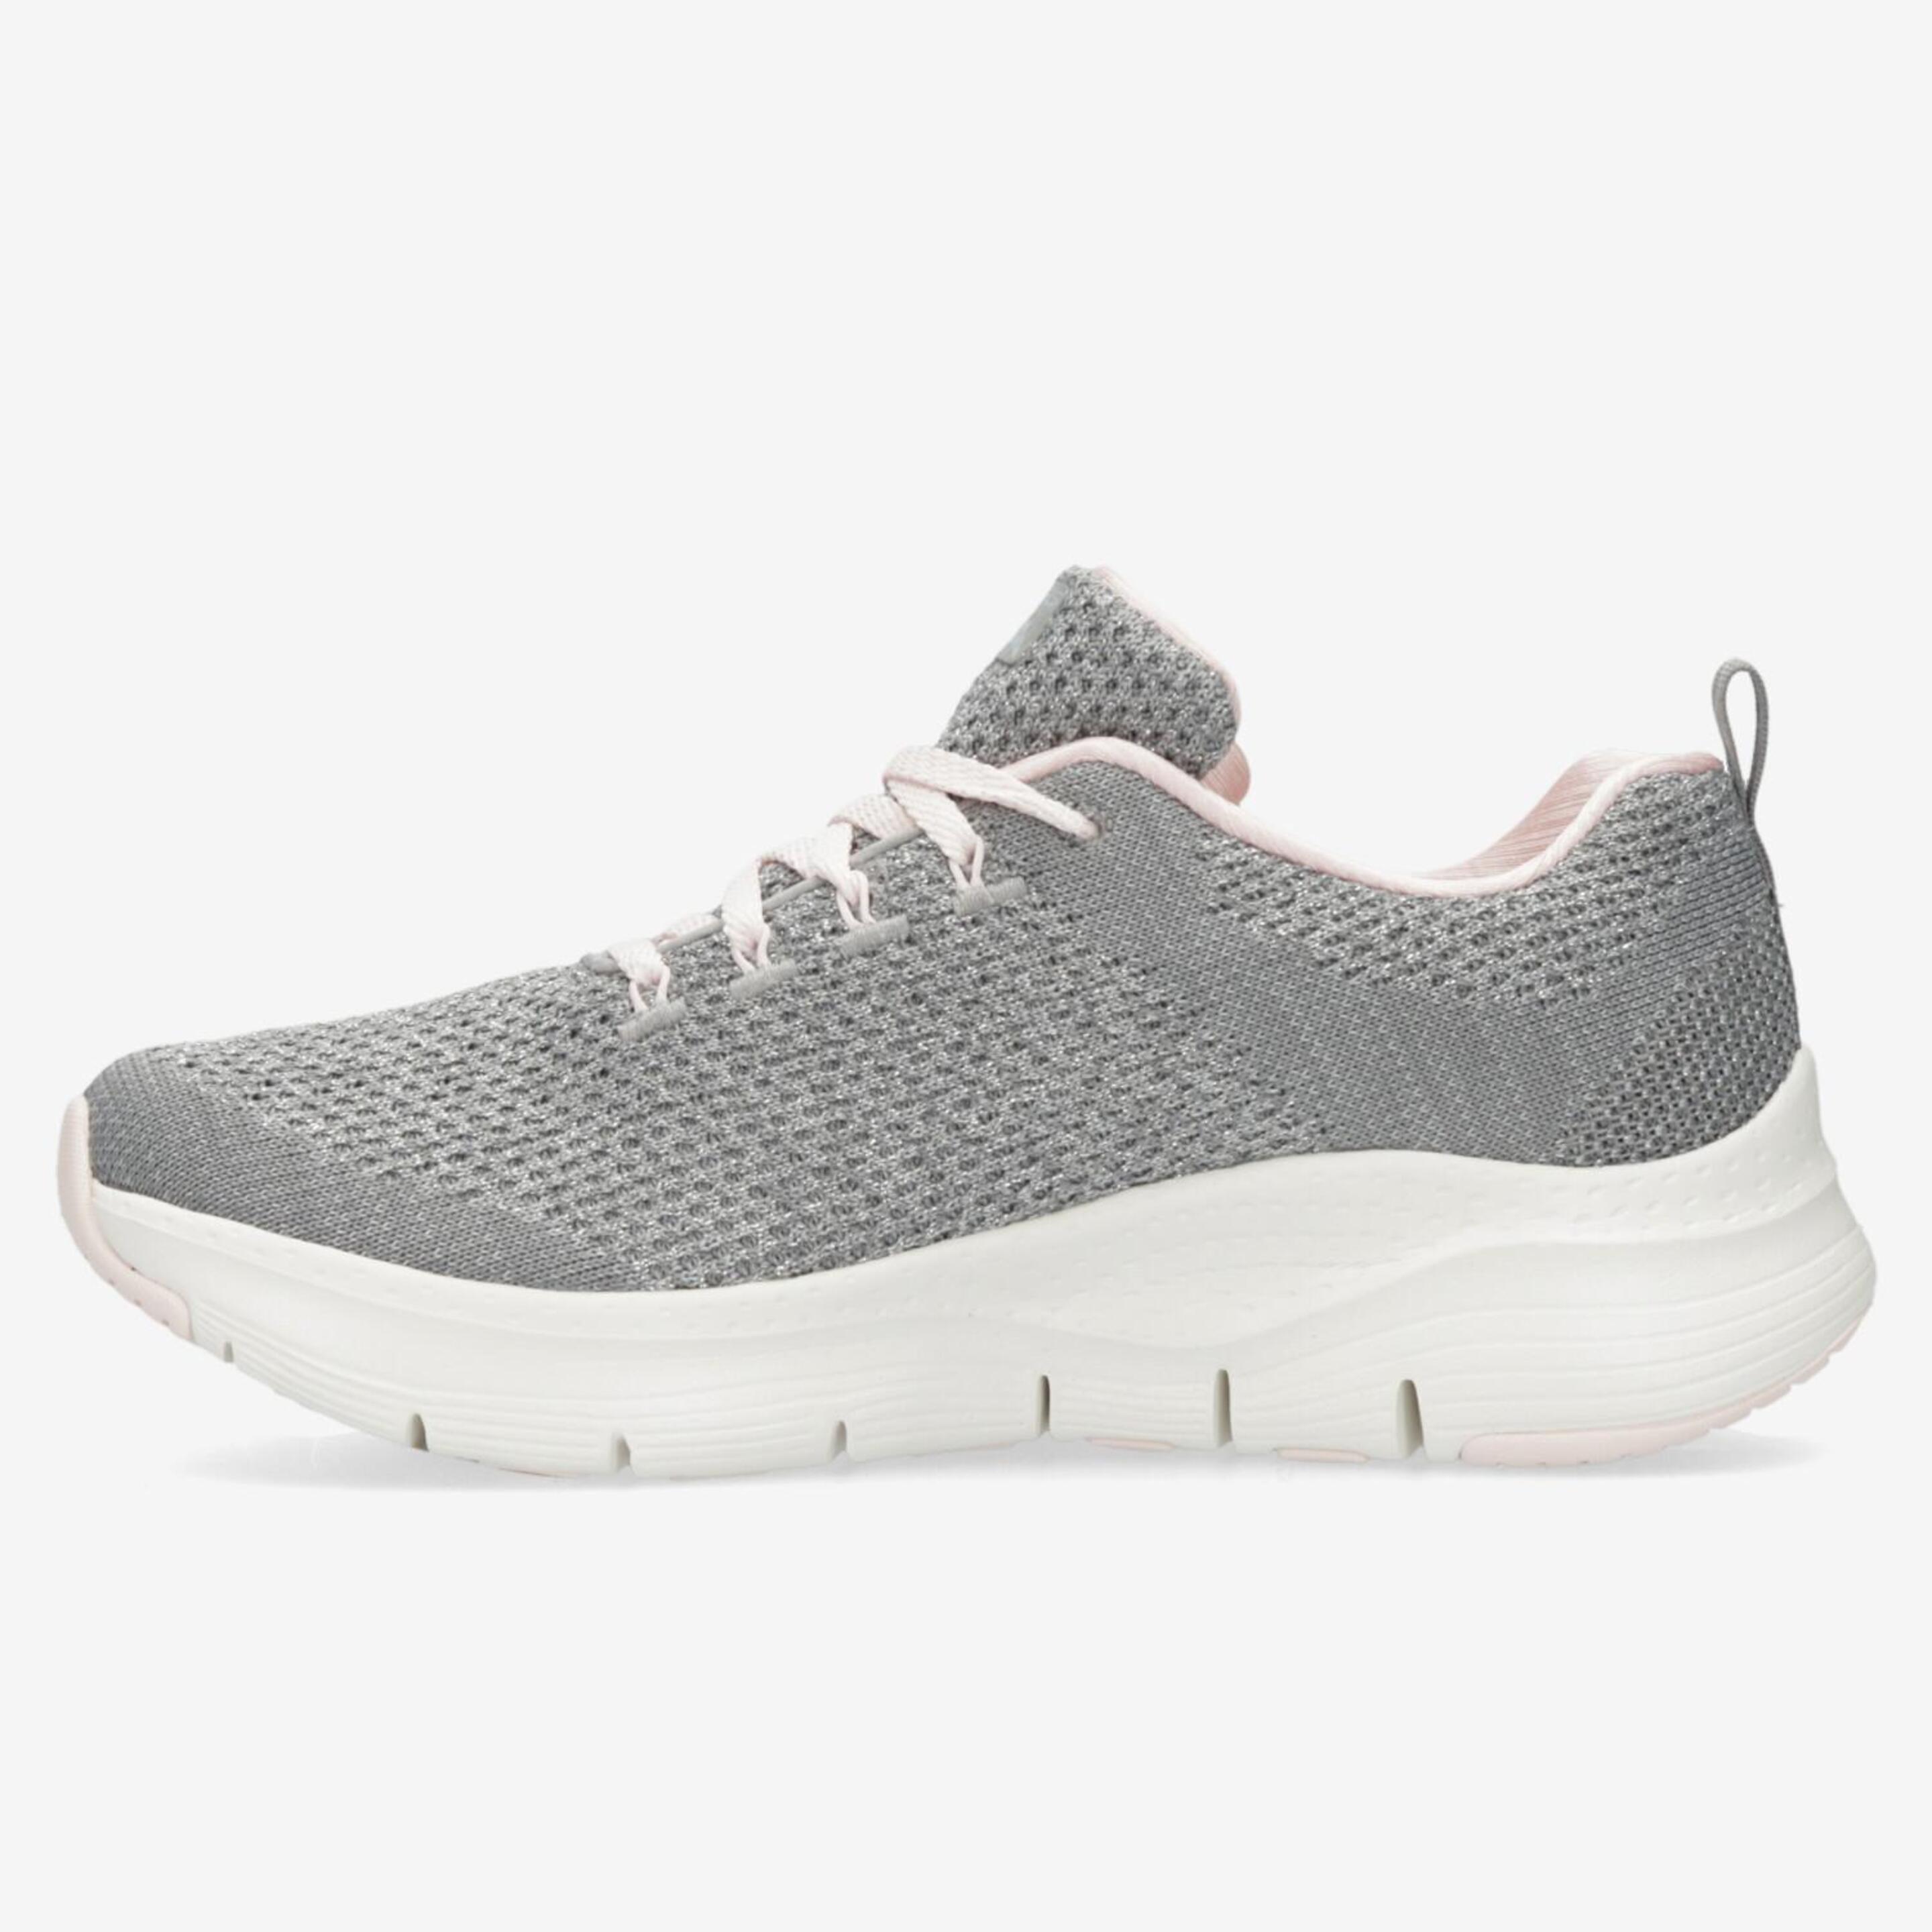 Skechers Arch Fit Infinite - Gris - Zapatillas Running Mujer